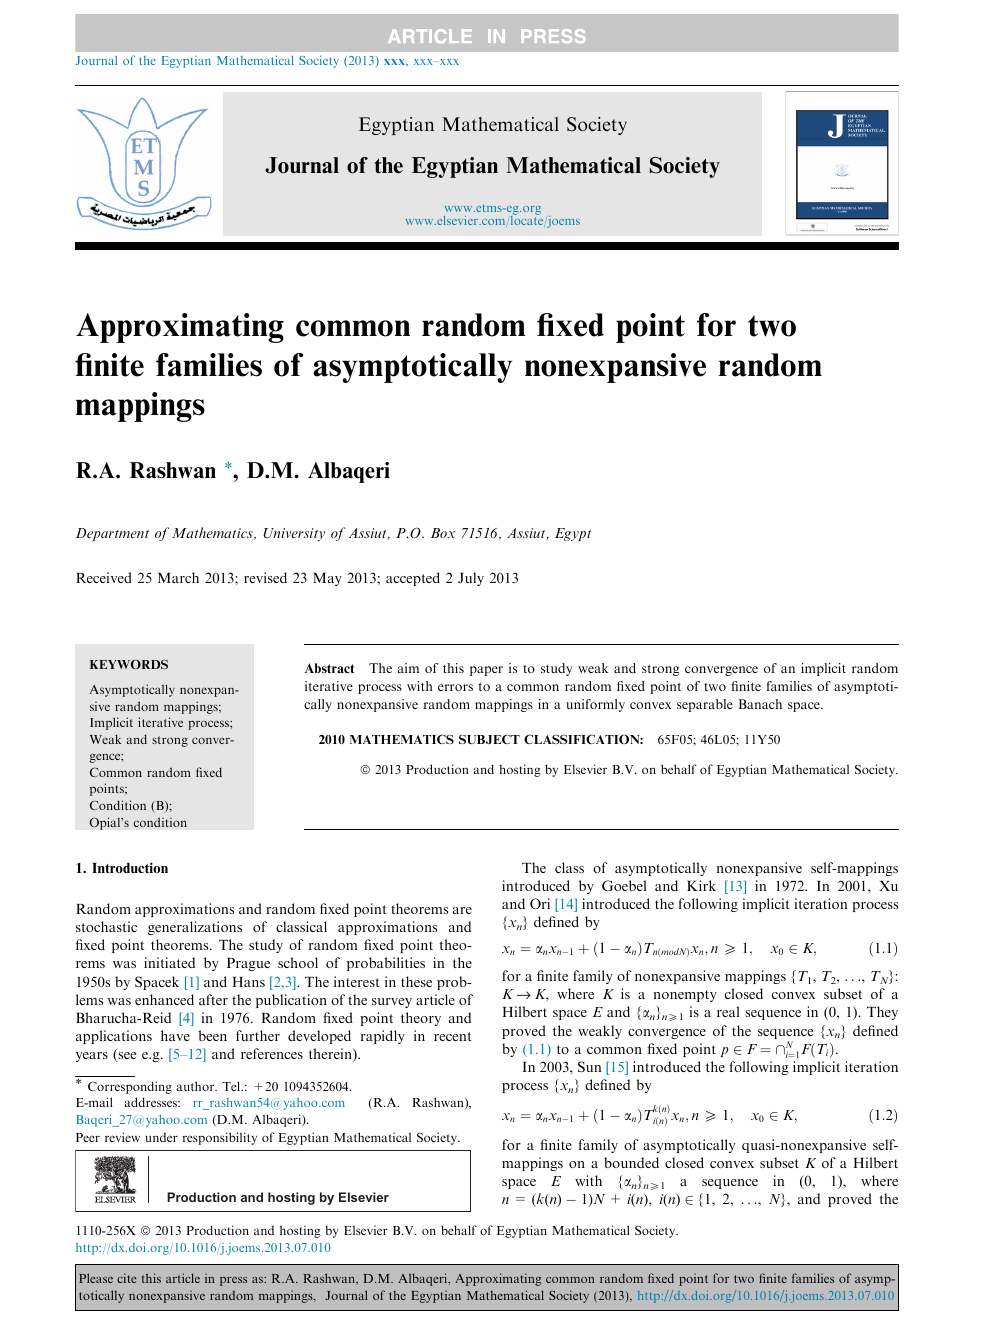 Approximating Common Random Fixed Point For Two Finite Families Of Asymptotically Nonexpansive Random Mappings Topic Of Research Paper In Mathematics Download Scholarly Article Pdf And Read For Free On Cyberleninka Open